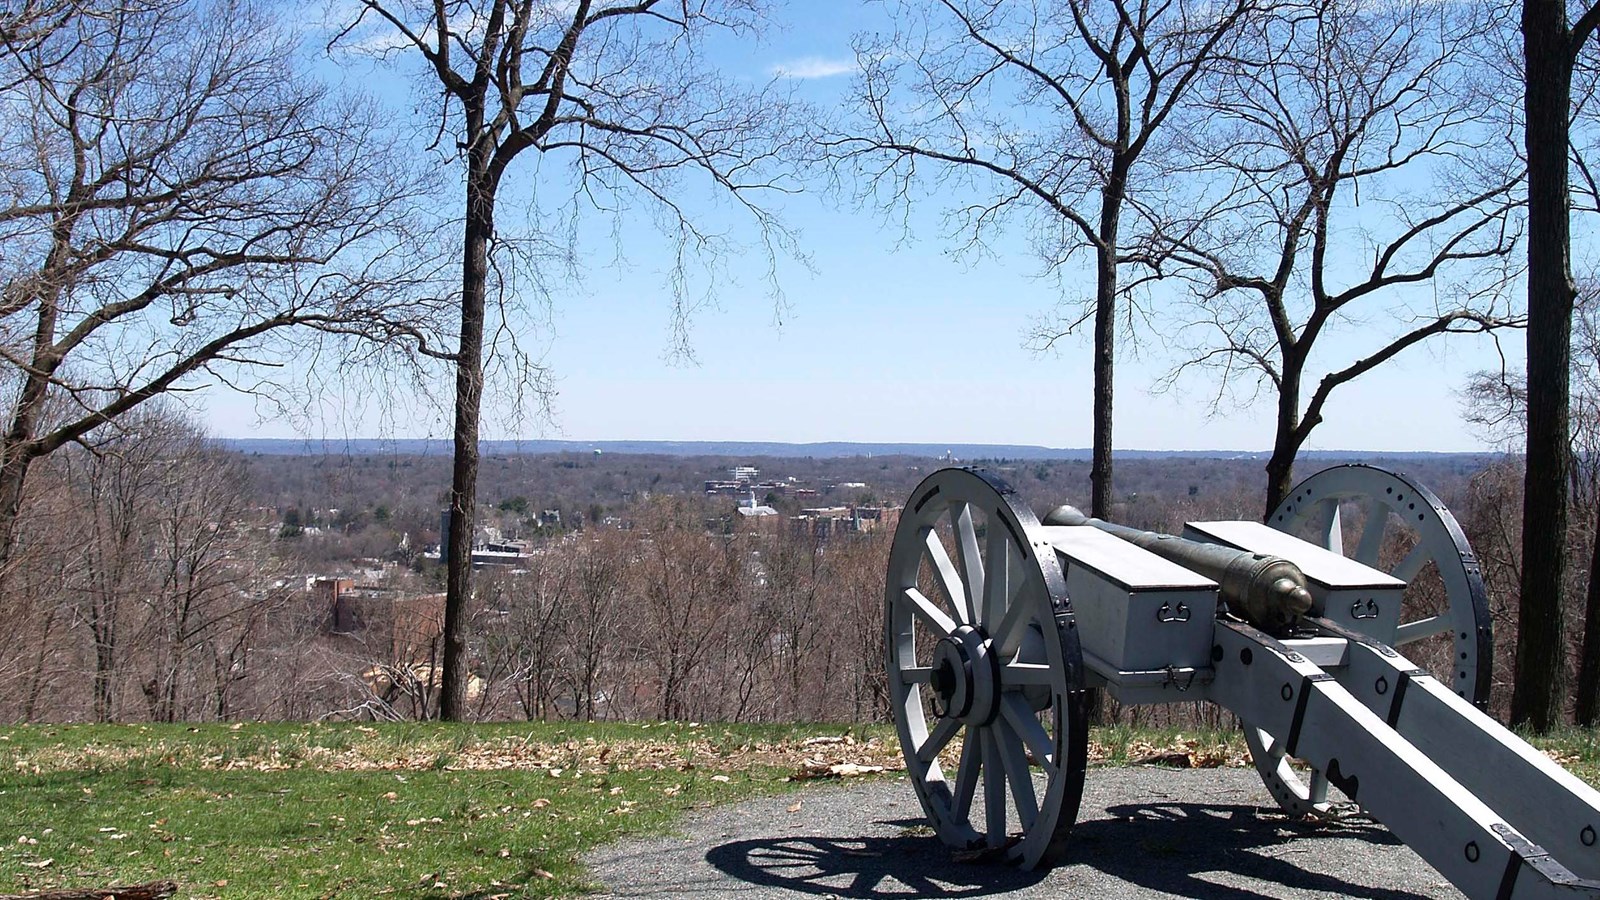 A cannon from the Revolutionary War era overlooks a valley.